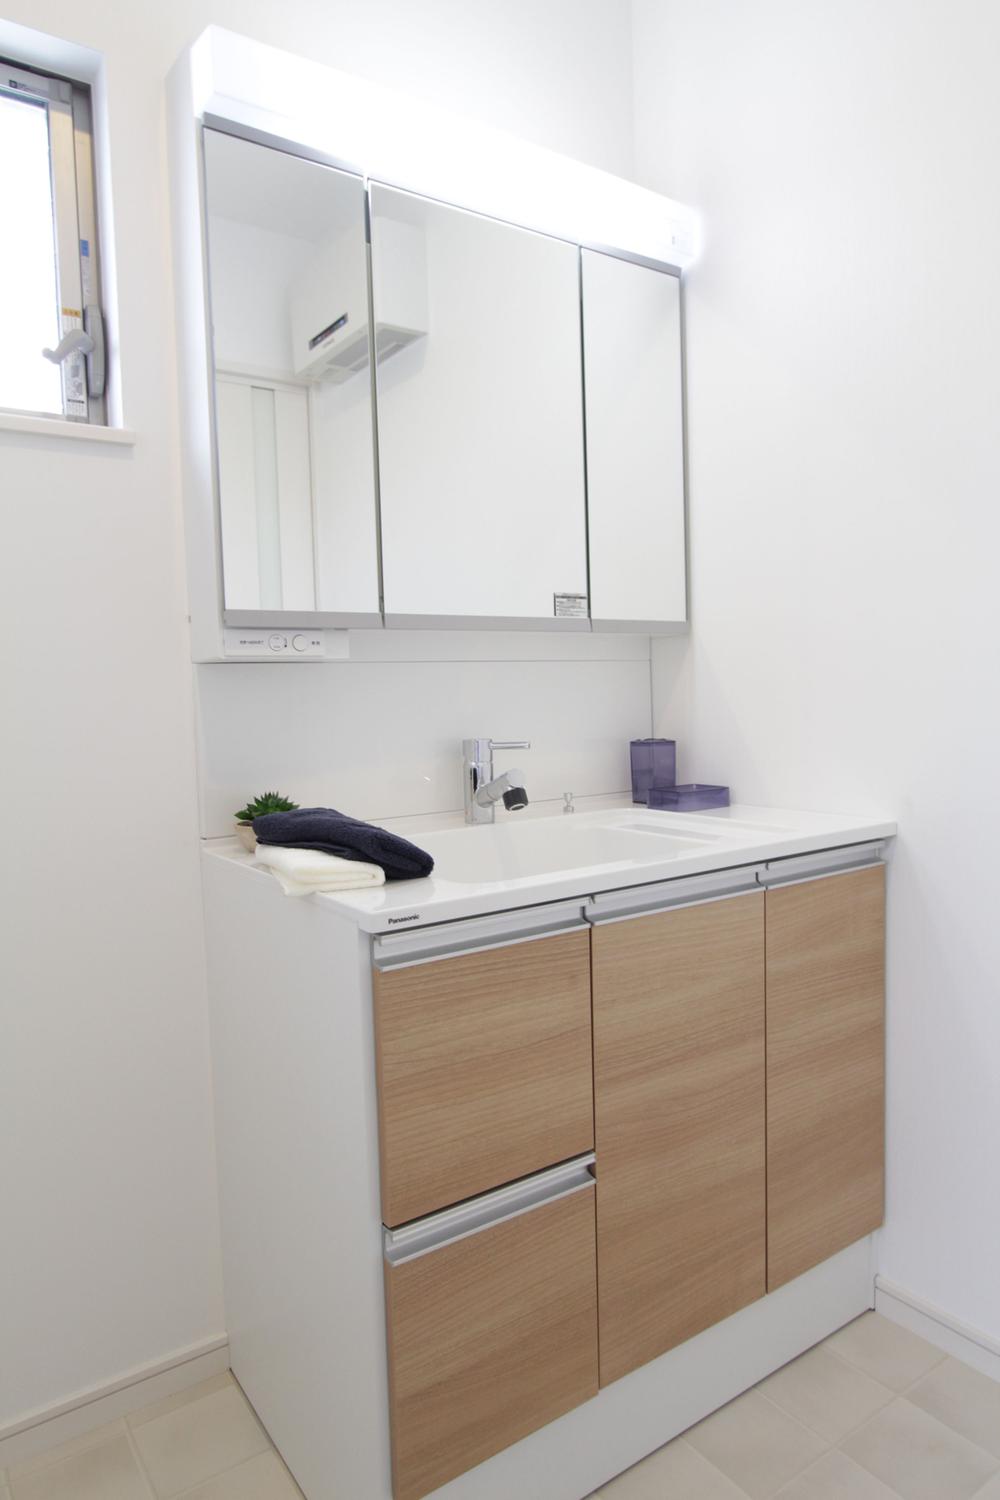 Building plan example (introspection photo). Wash basin of wide three-sided mirror